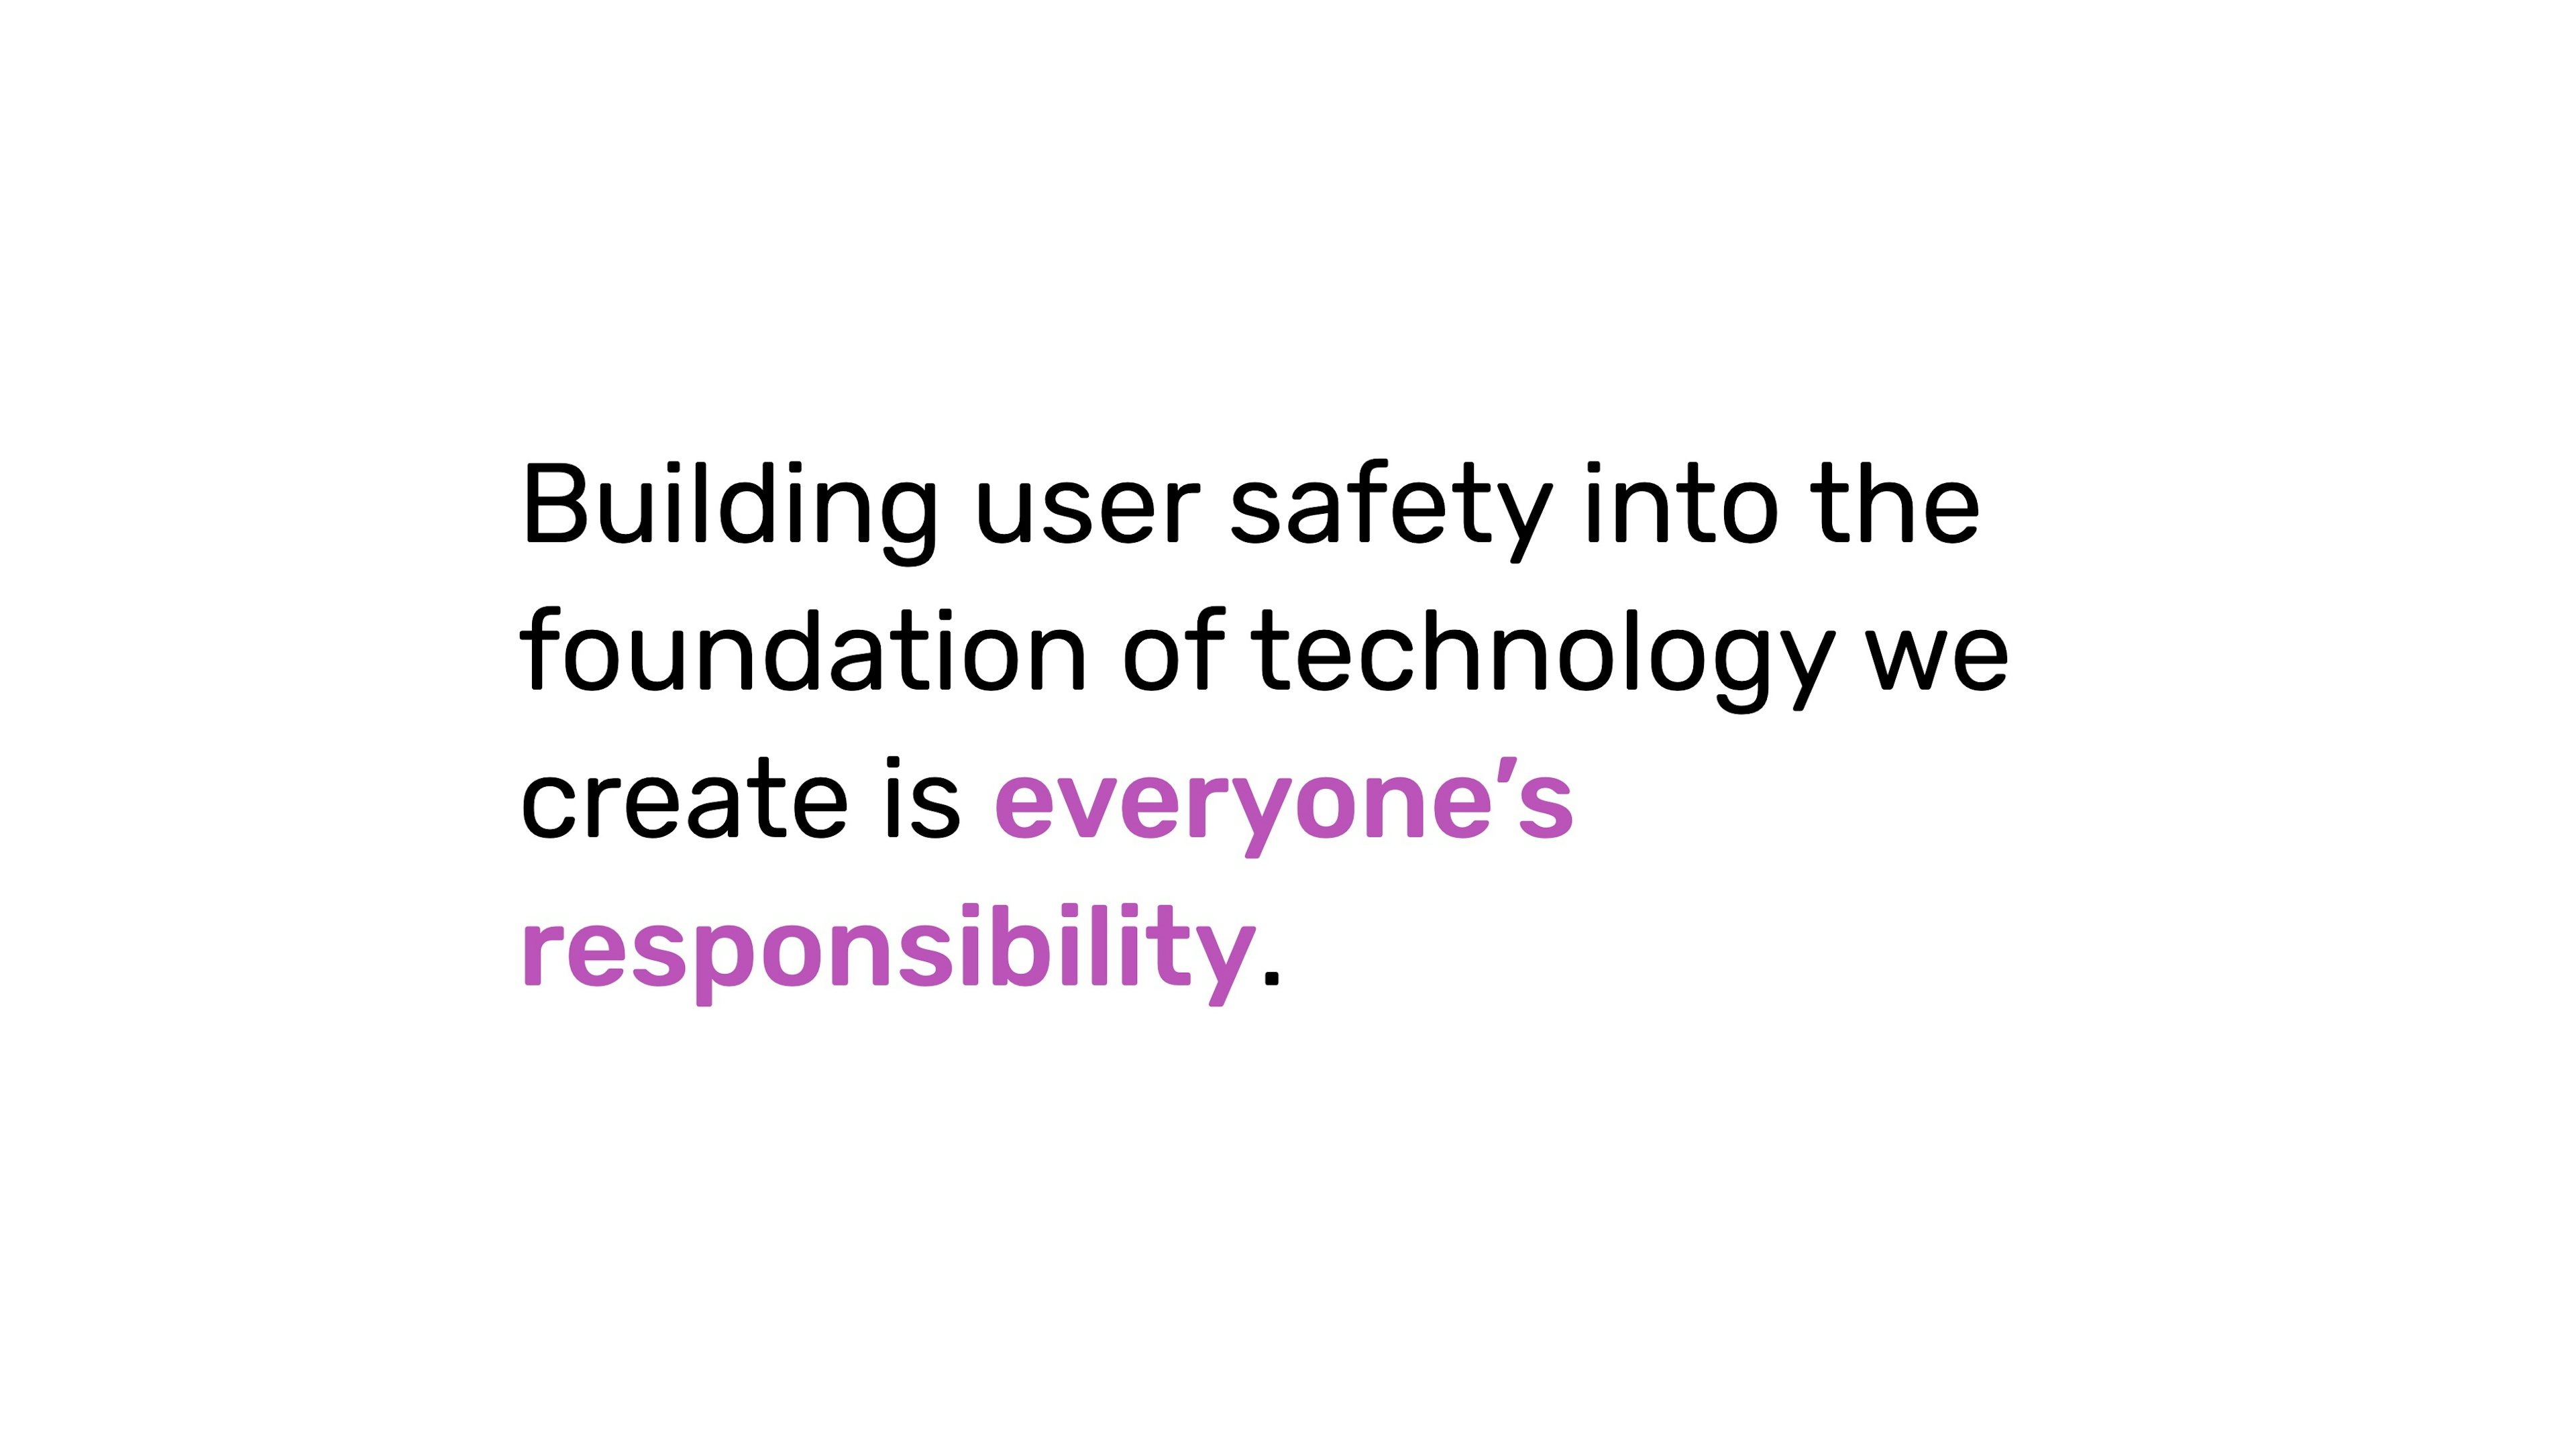 Building user safety into the foundation of technology we create is everyone's responsibility